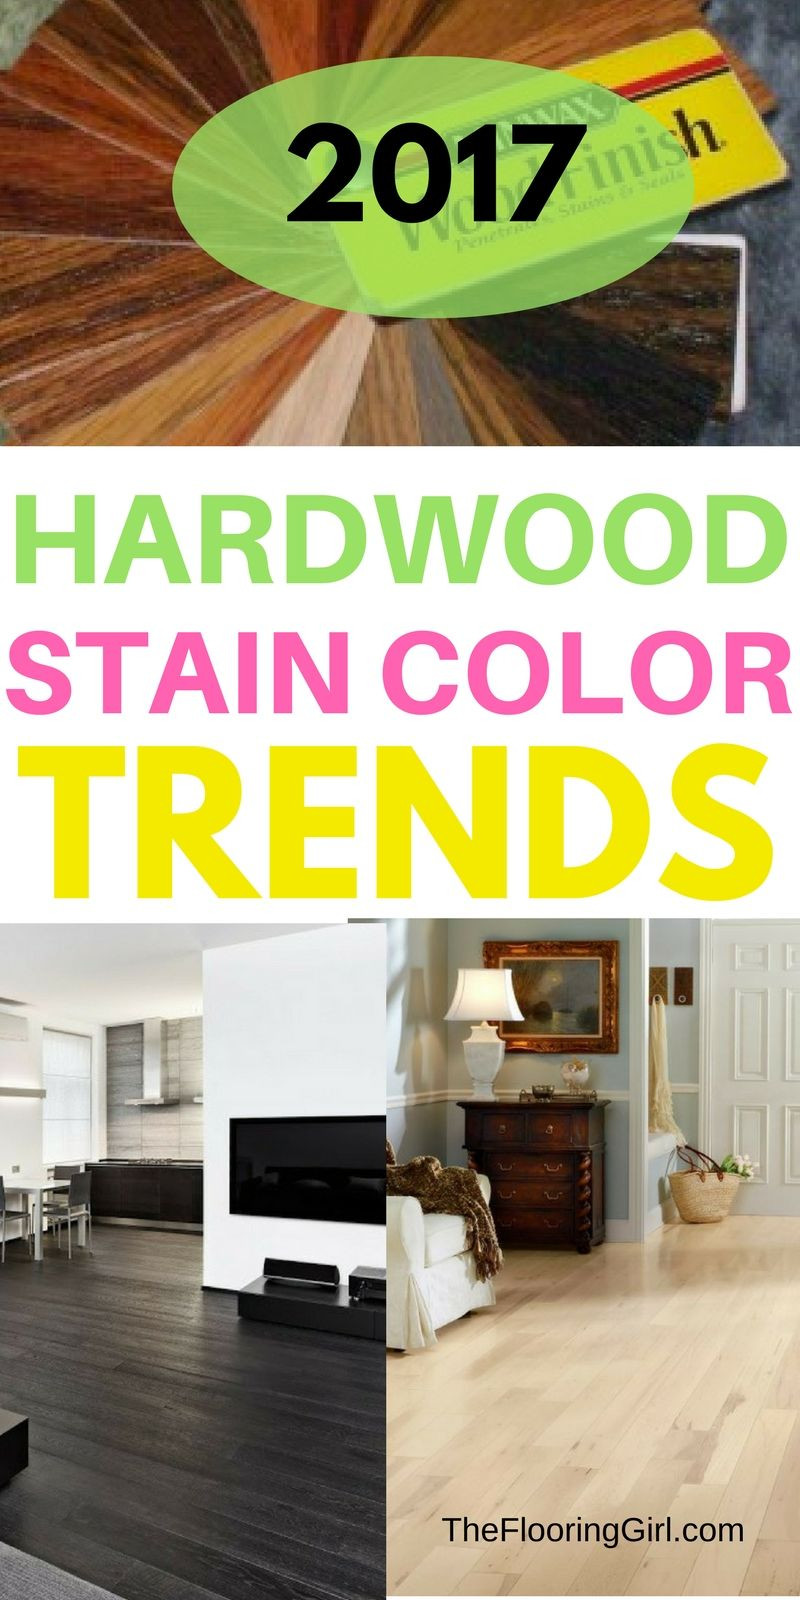 11 Great Hardwood Floor Refinishing tools 2024 free download hardwood floor refinishing tools of hardwood flooring stain color trends 2018 more from the flooring intended for hardwood flooring stain color trends for 2017 hardwood colors that are in st